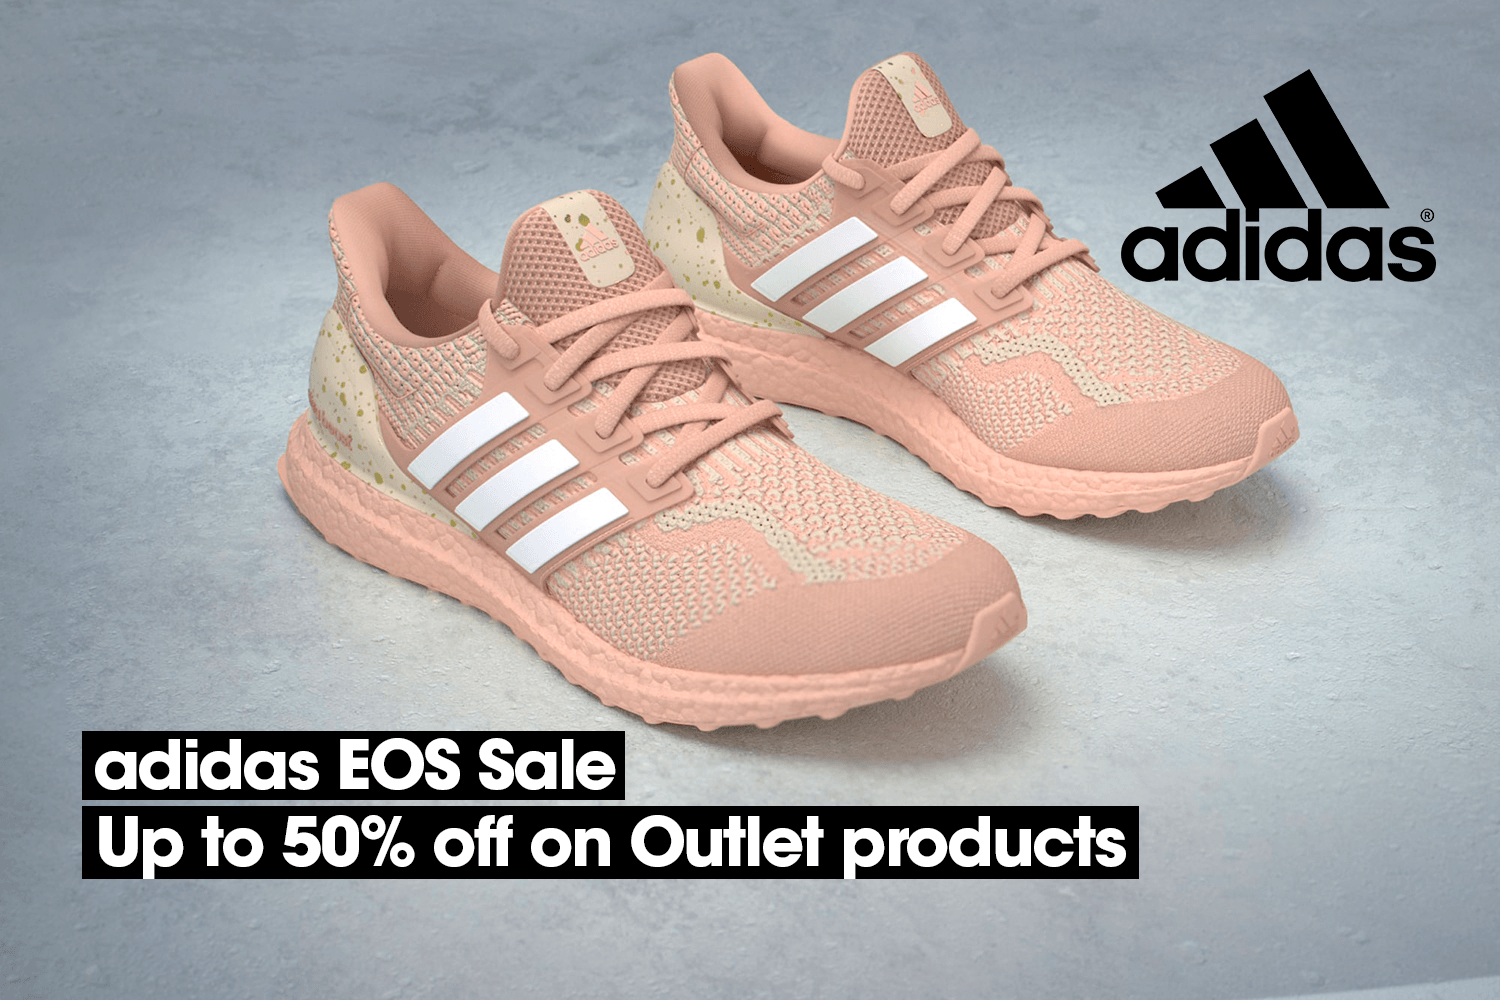 Save up to 50% on sale items from adidas